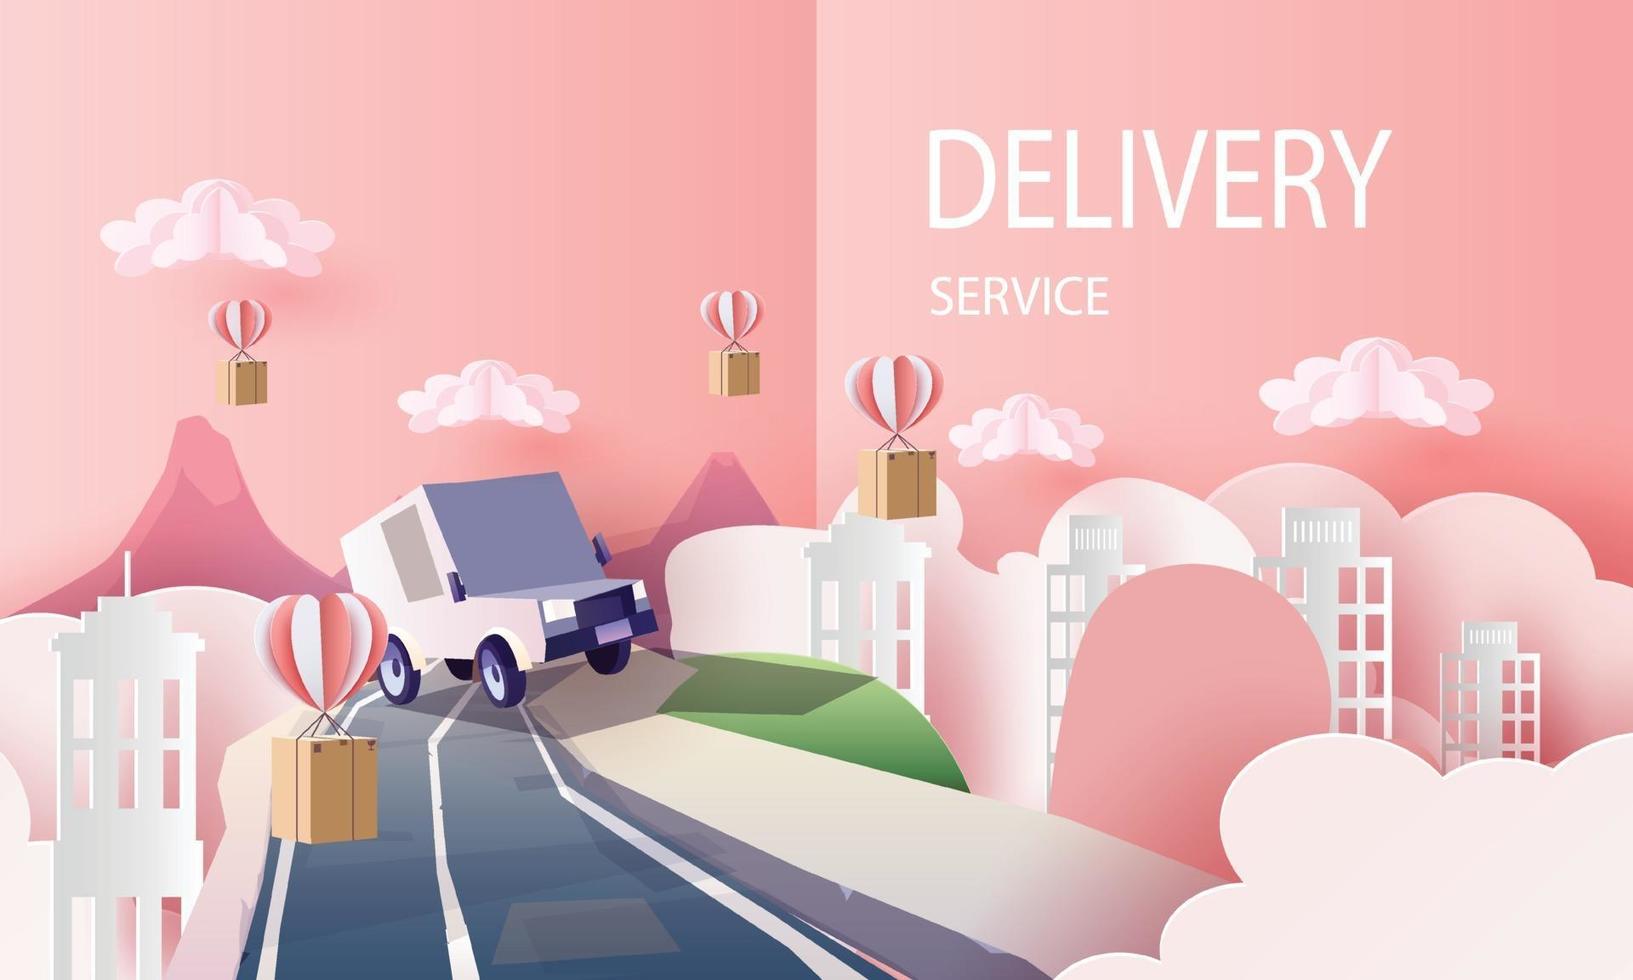 Paper art courier van cartoon in town delivery service, and shopping online vector art and illustration.